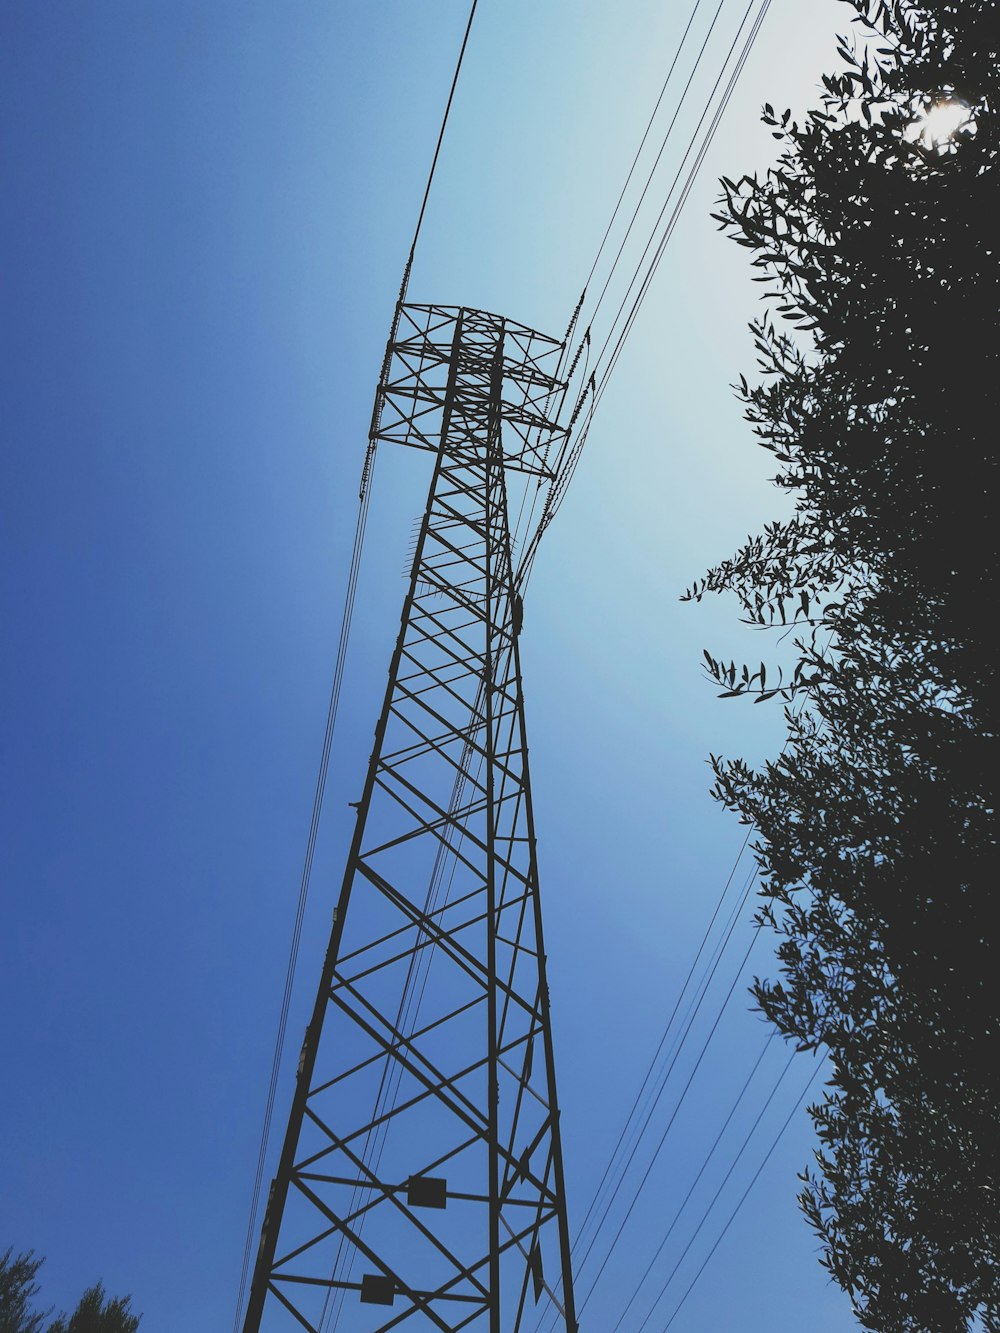 black electric tower under blue sky during daytime